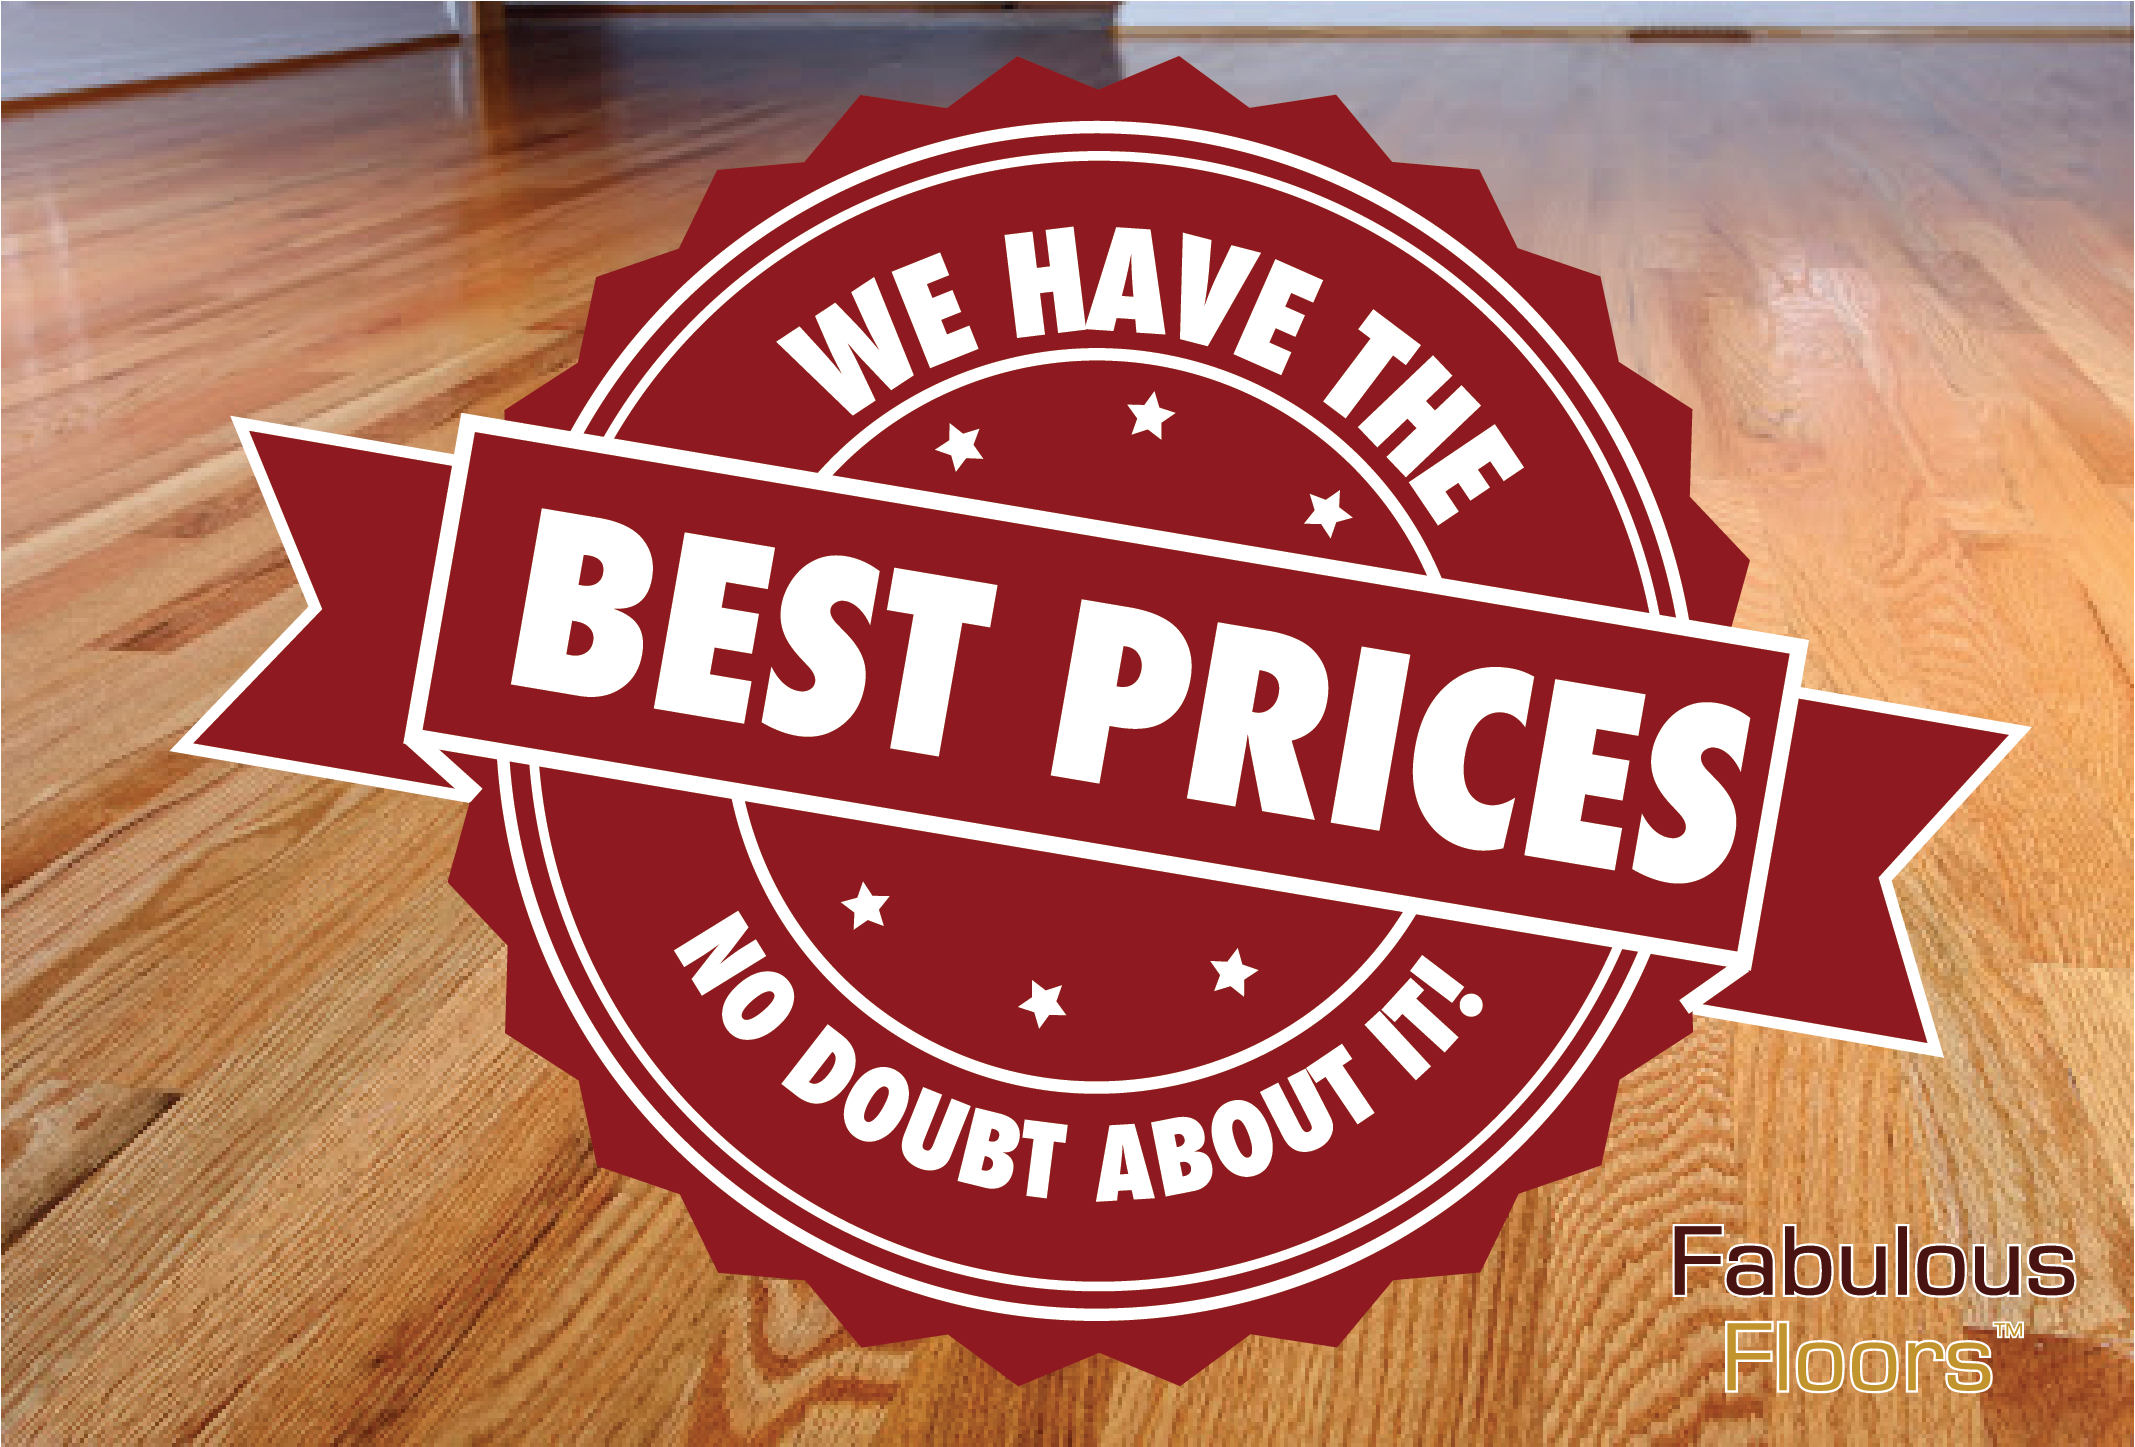 A graphic saying that we have the best prices no doubt about it